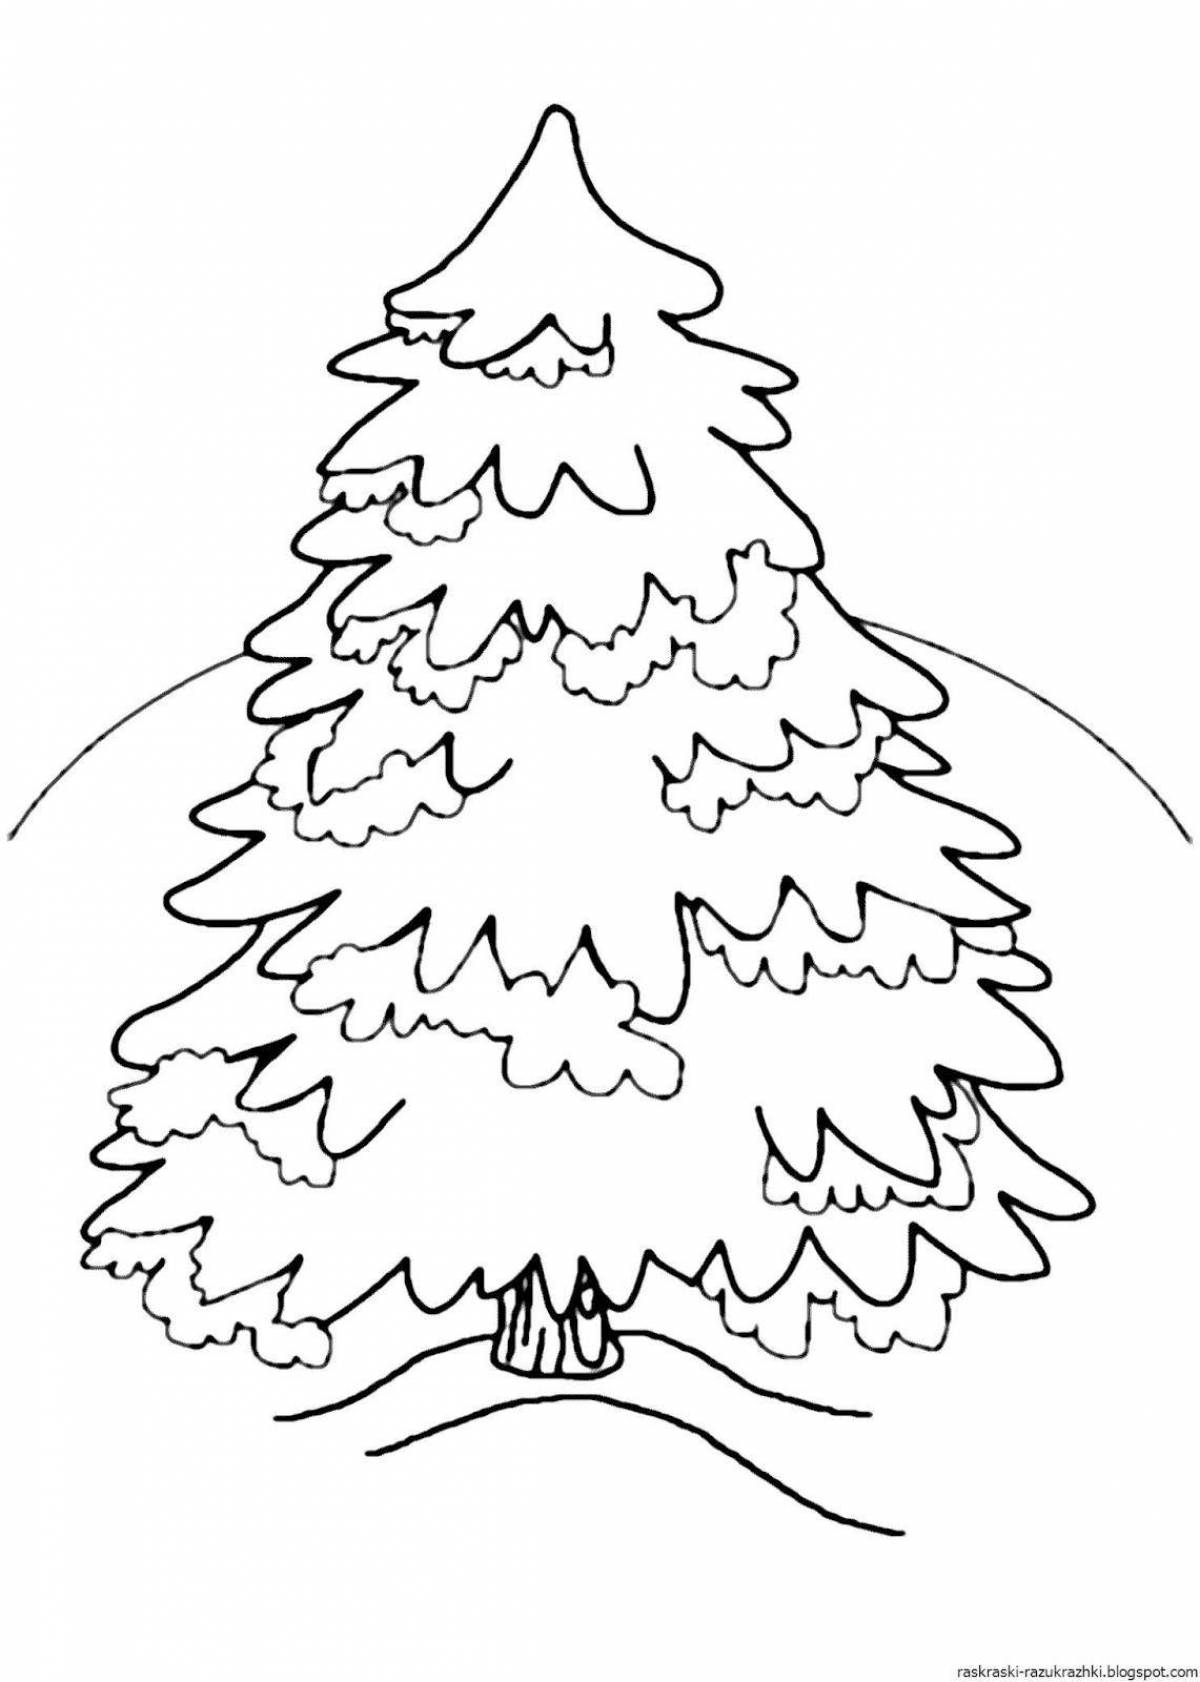 Bright forest grew a Christmas tree coloring book